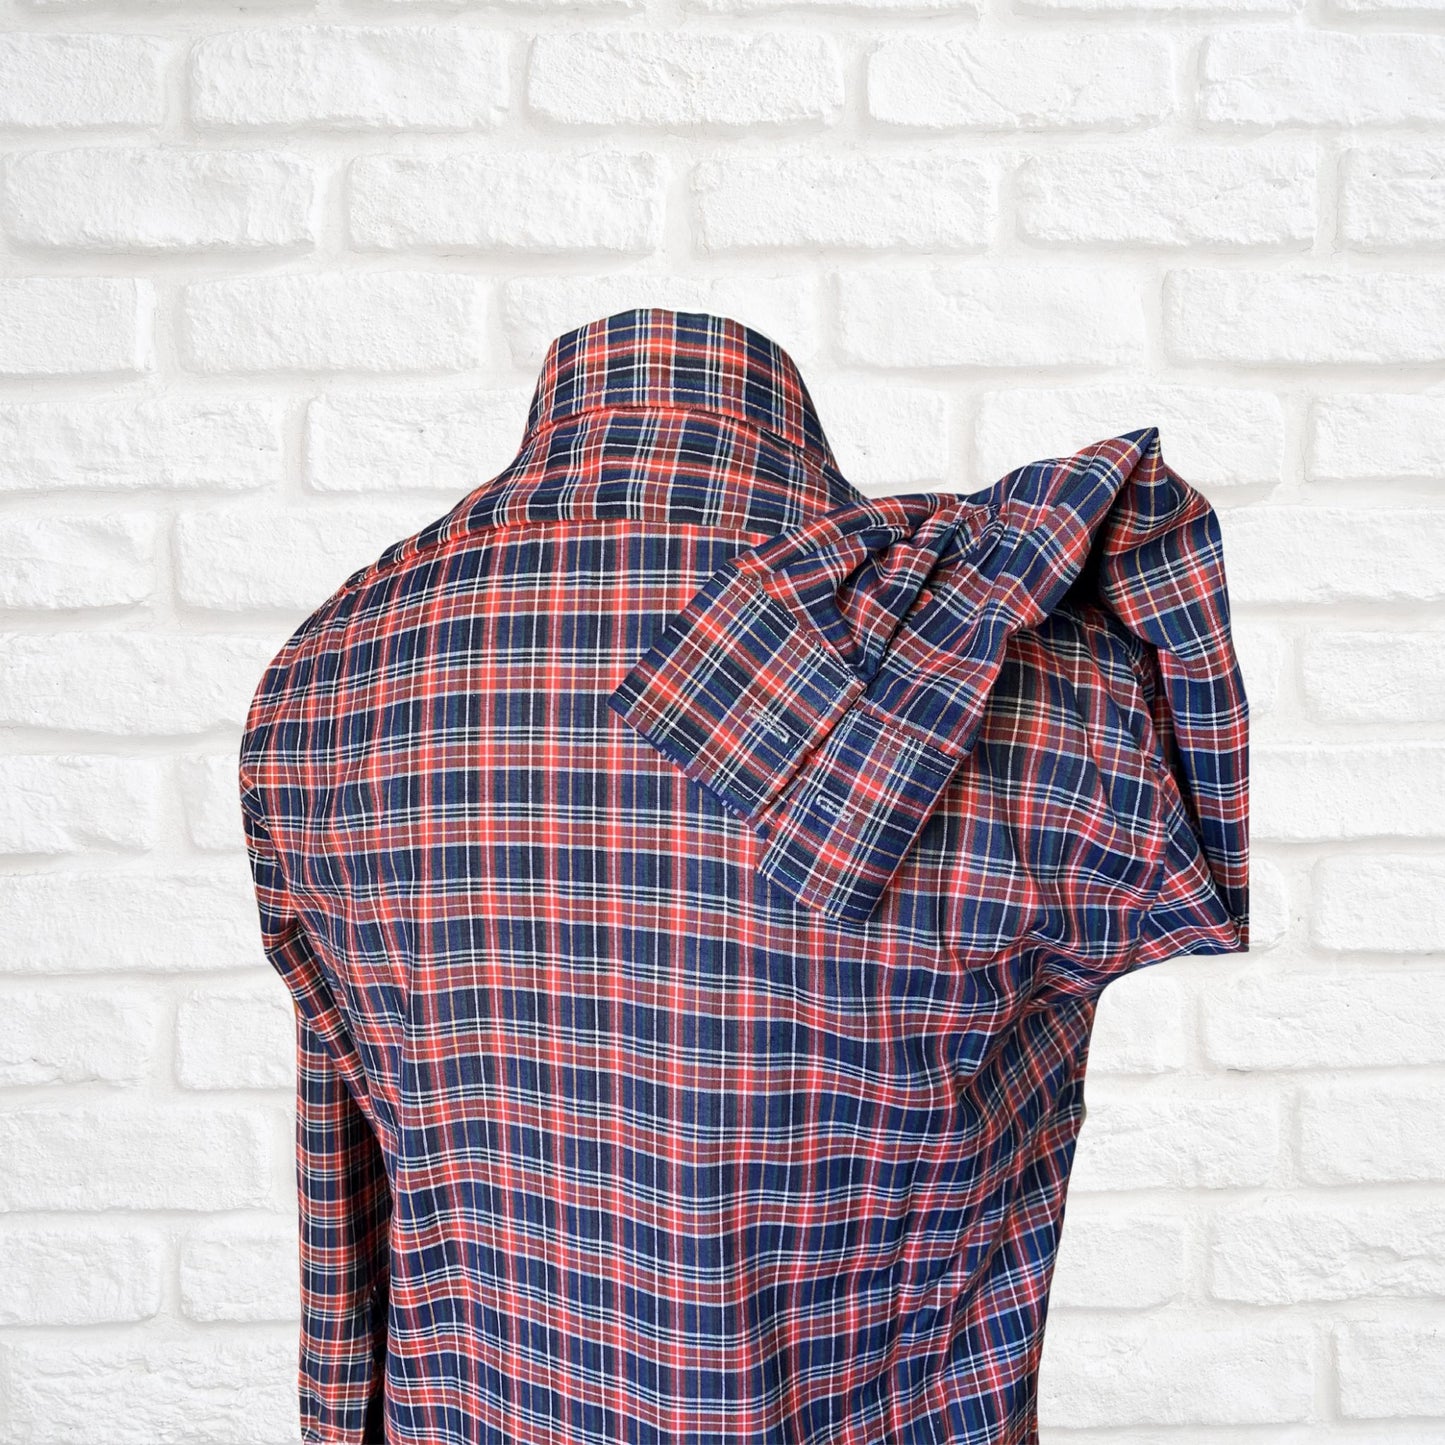 70s Vintage Red and Blue Checked Lightweight Shirt with Dagger Collar - Classic Retro Style for Casual Weekend Wear. Approx UK size M to L (men) 16-18 (women)